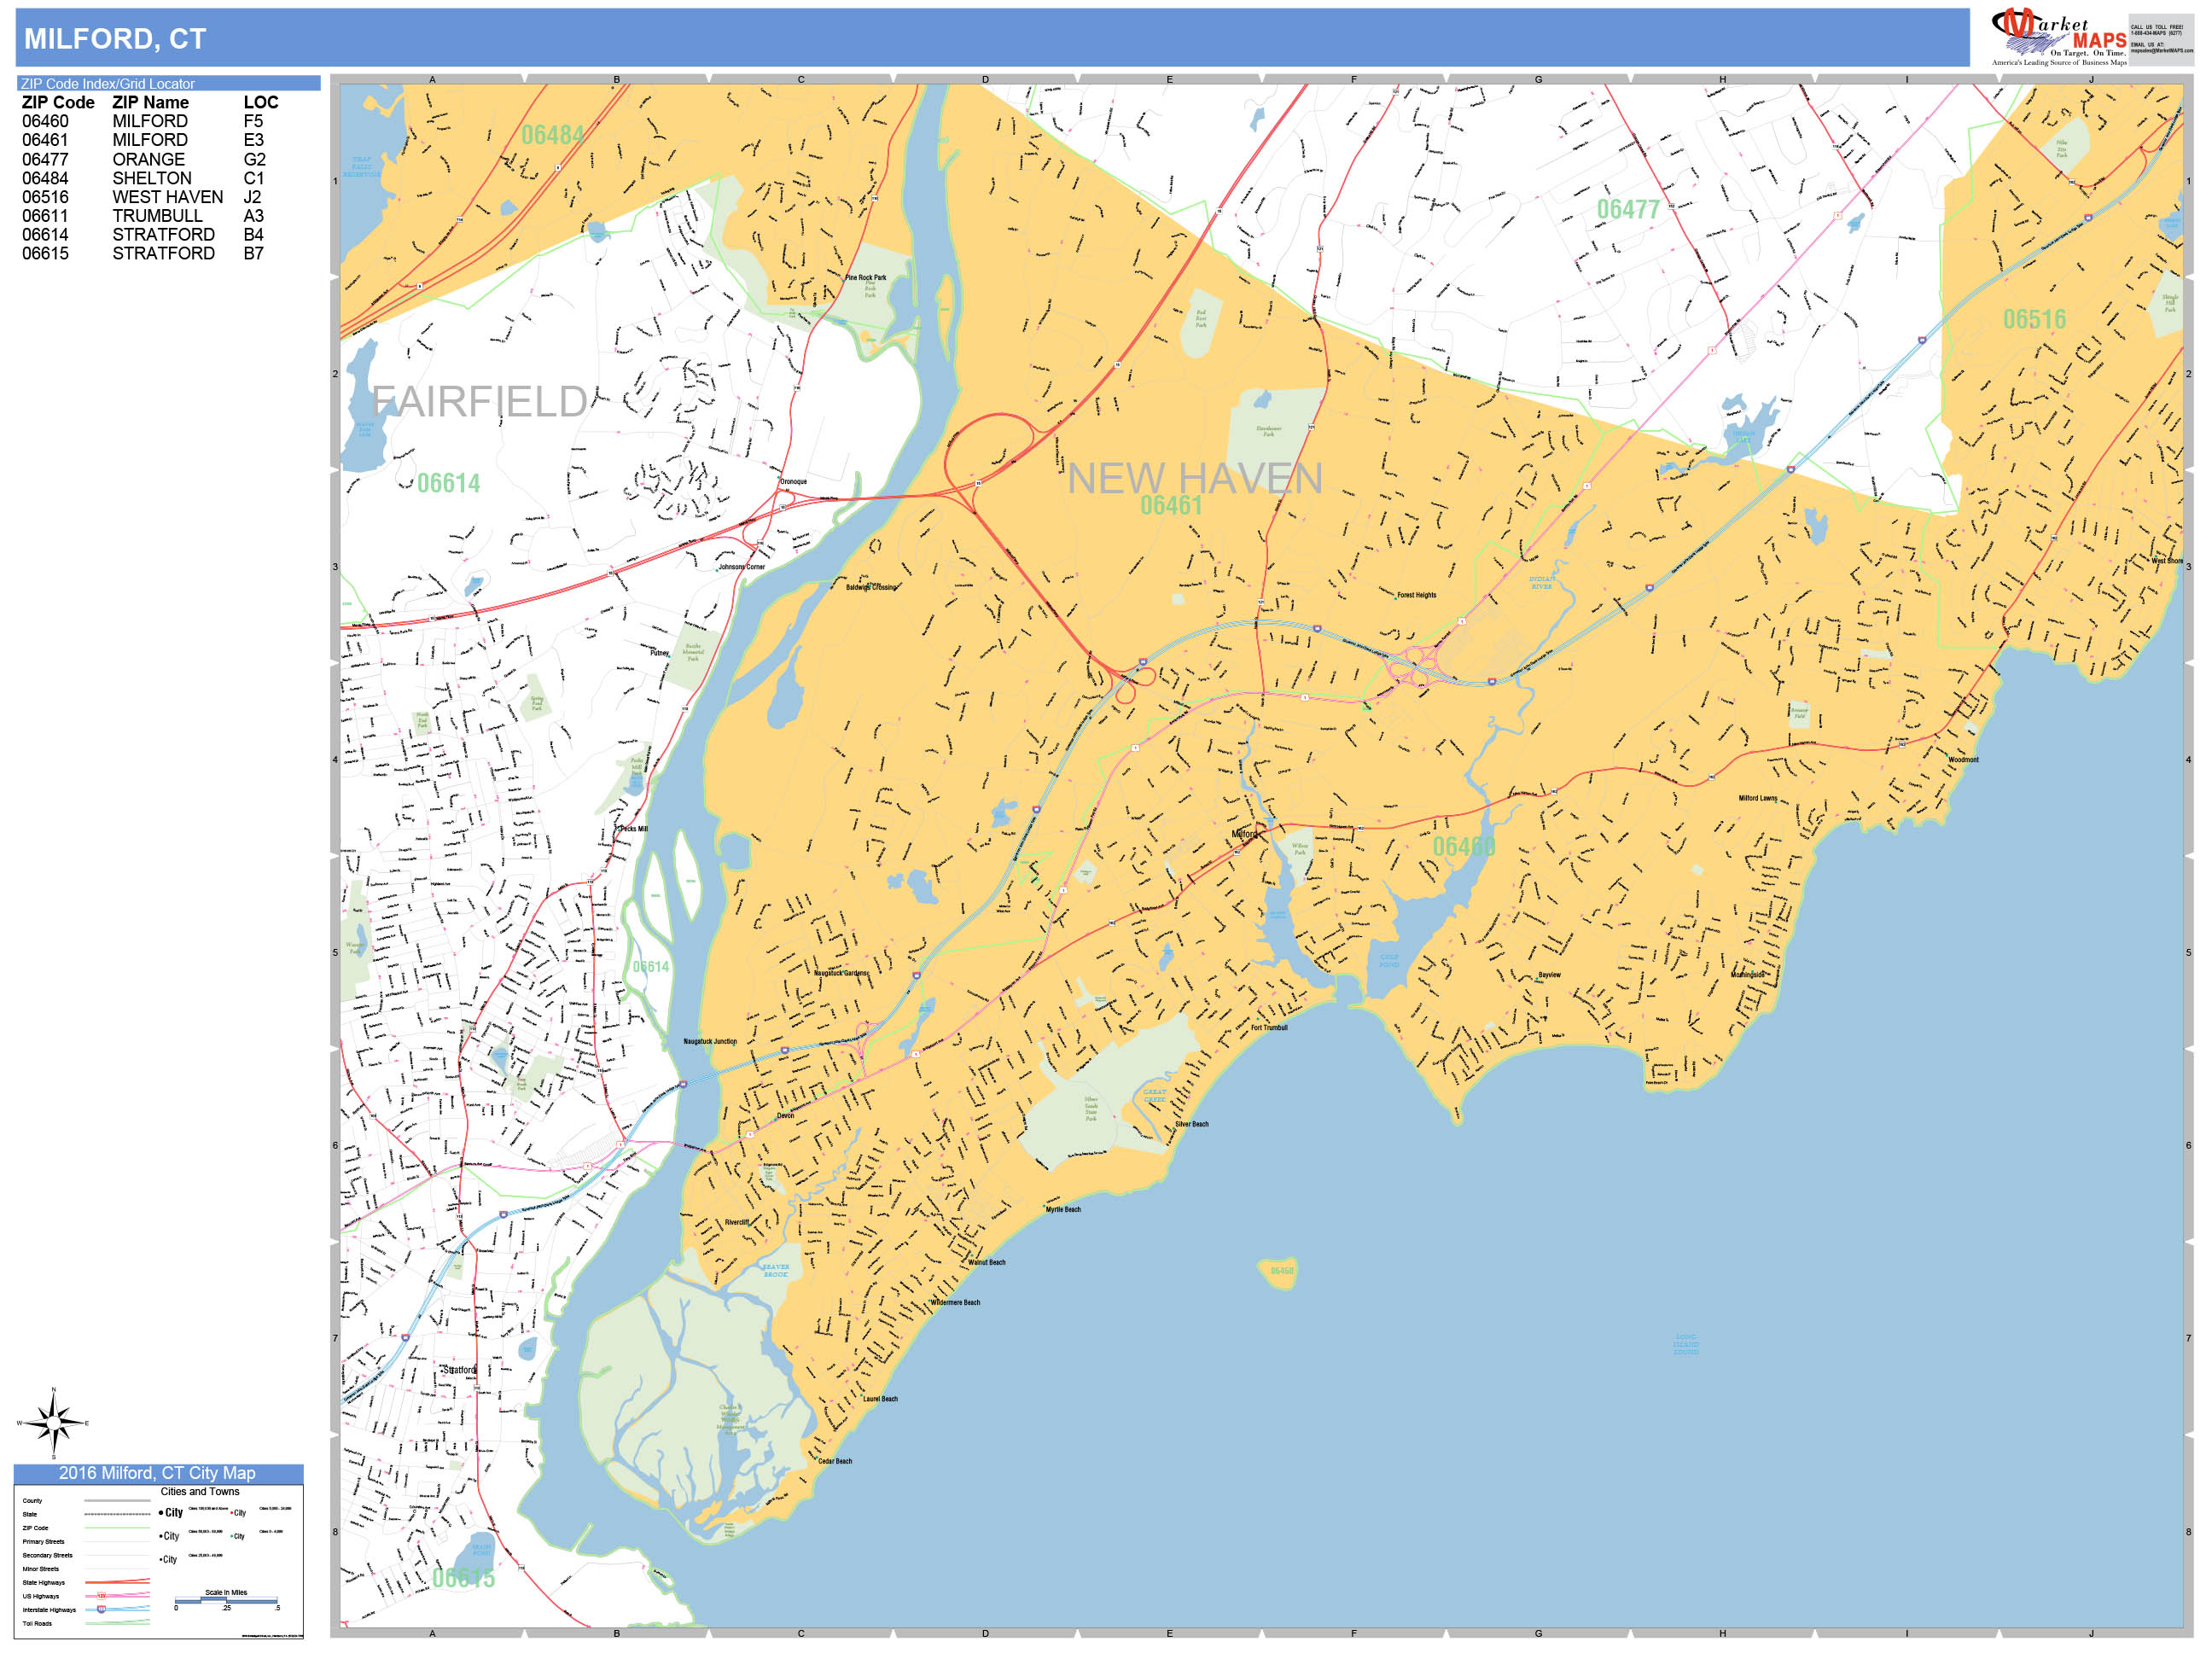 milford-connecticut-wall-map-basic-style-by-marketmaps-mapsales